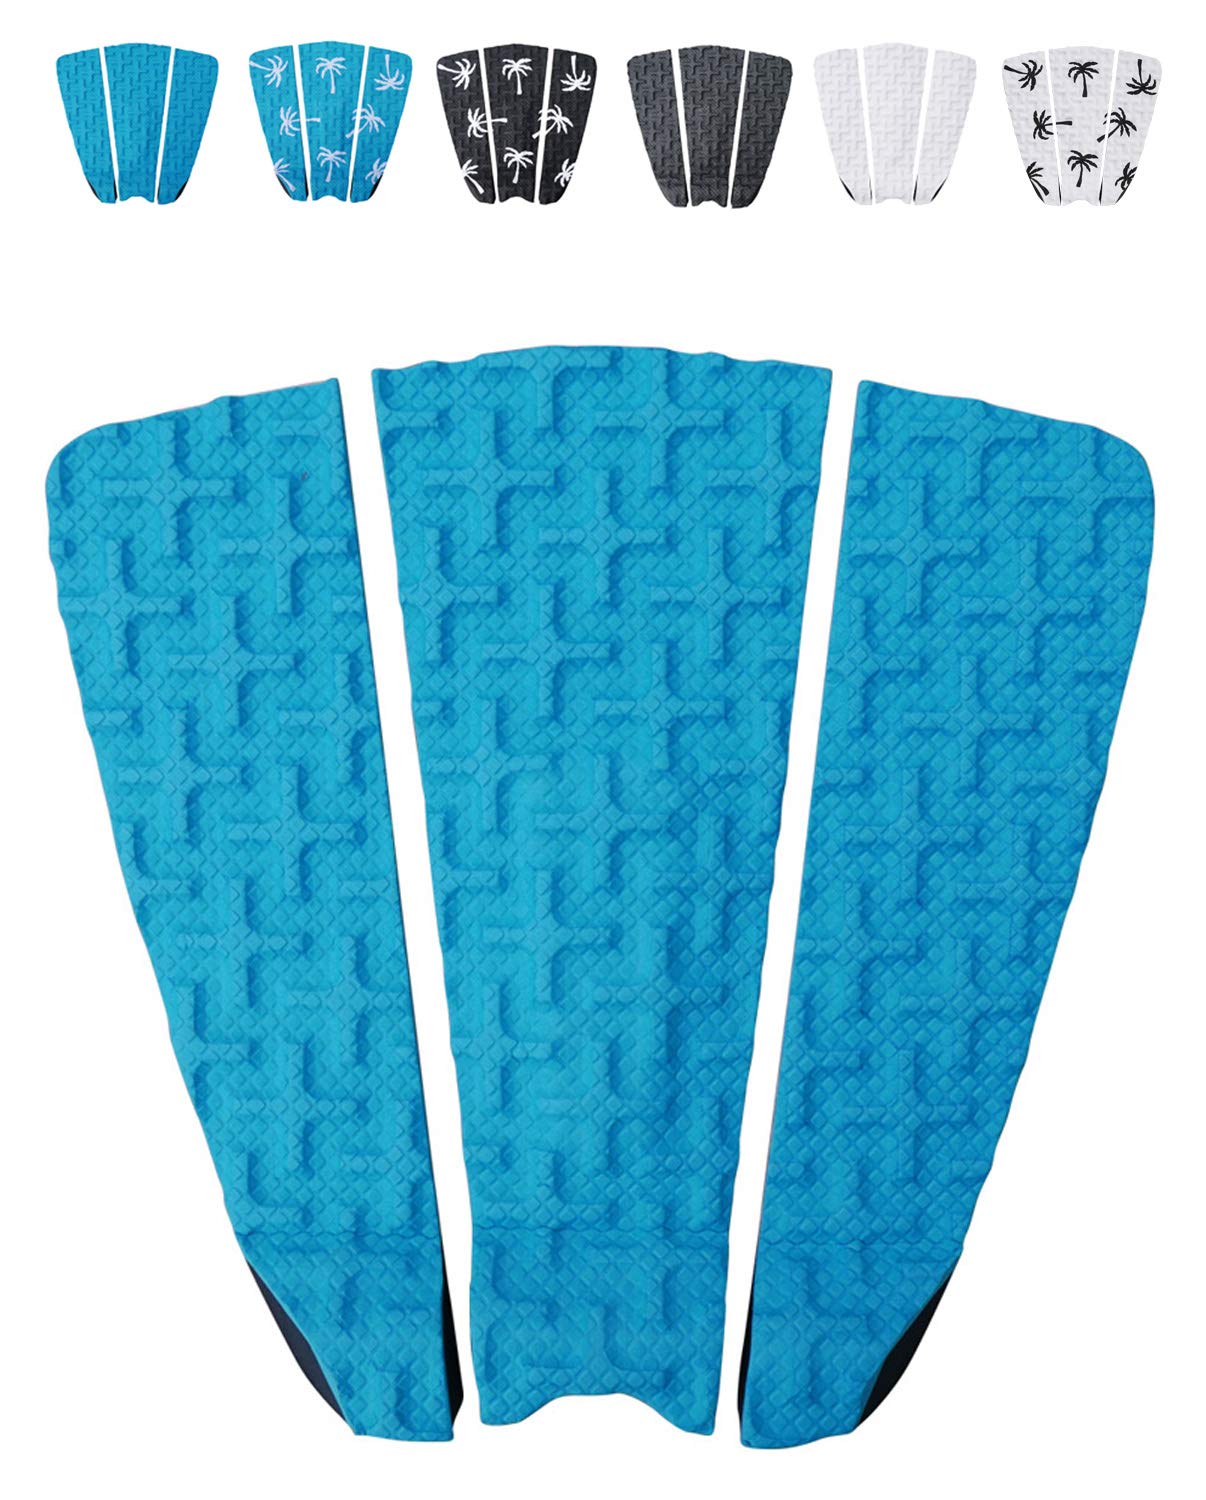 Ho Stevie! Premium Surfboard Traction Pad